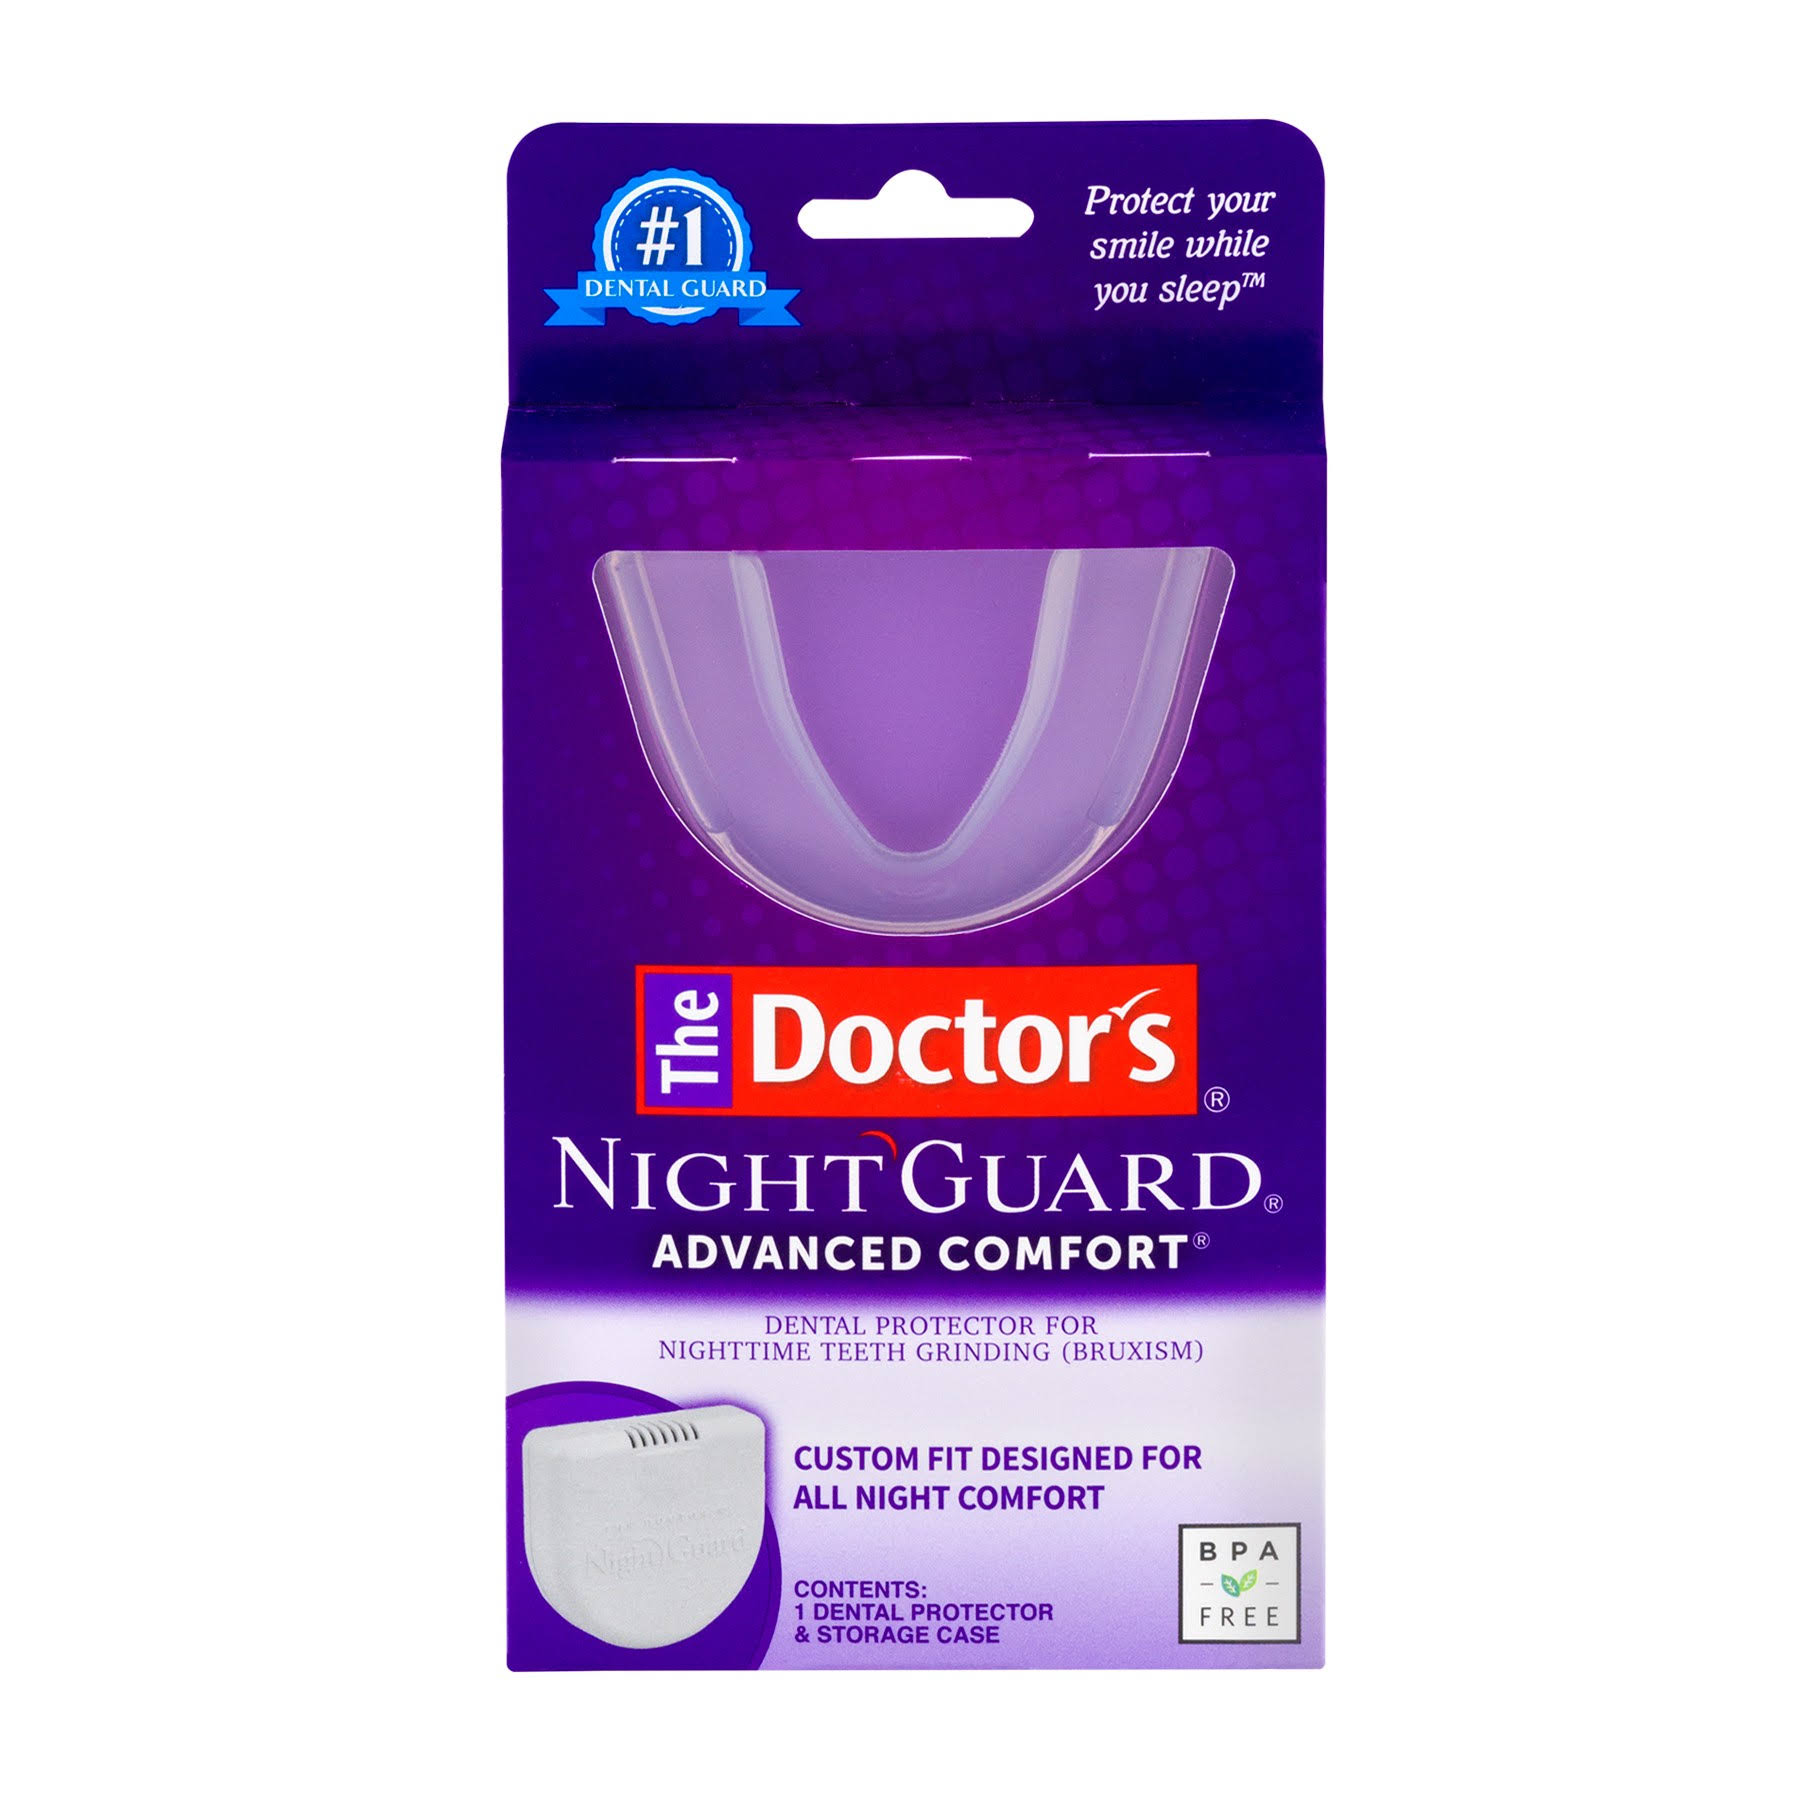 The Doctor's NightGuard Advanced Comfort Dental Protector for Teeth Grinding - 1pk